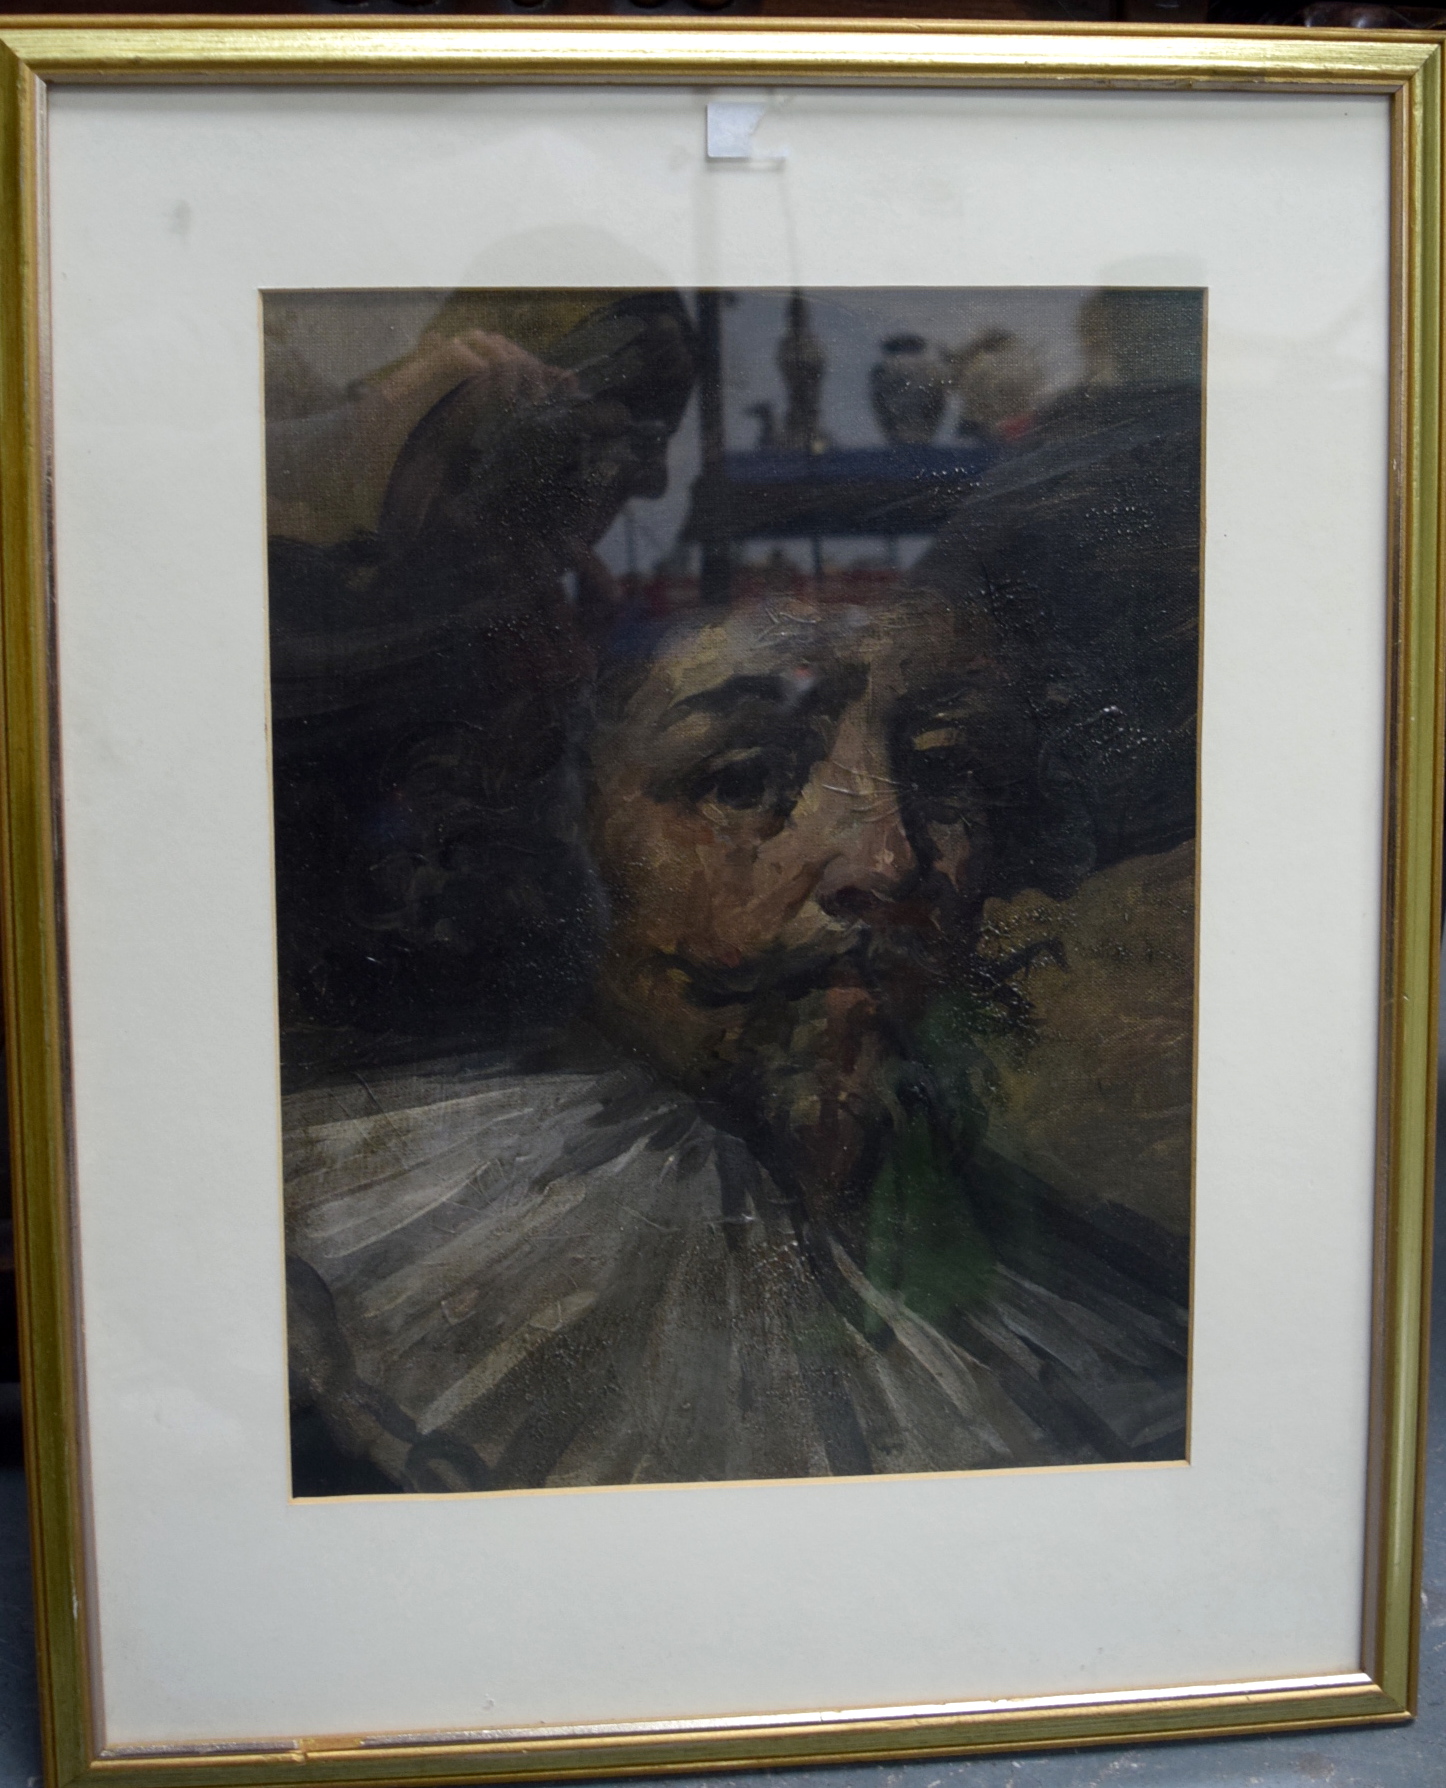 EUROPEAN SCHOOL (Early 20th century) FRAMED OIL ON CANVAS STRETCHED ON BOARD, portrait of Rembrandt - Image 2 of 3